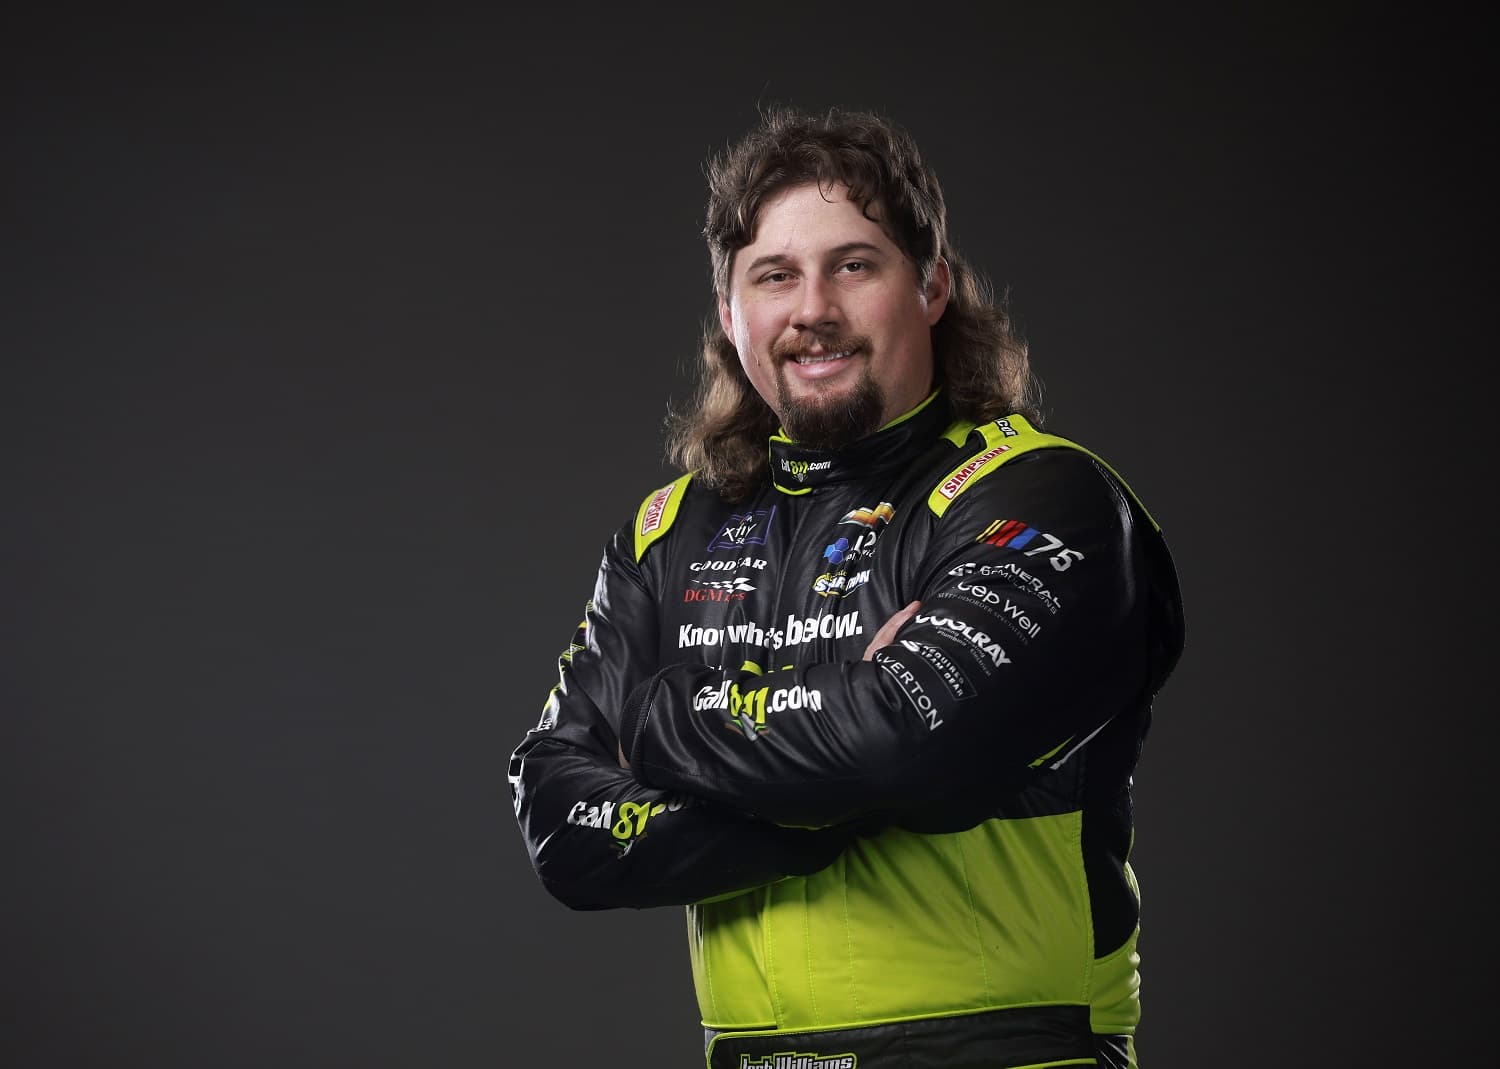 Driver Josh Williams poses for a photo during NASCAR Production Days at Charlotte Convention Center on Jan. 19, 2023 in Charlotte, North Carolina.